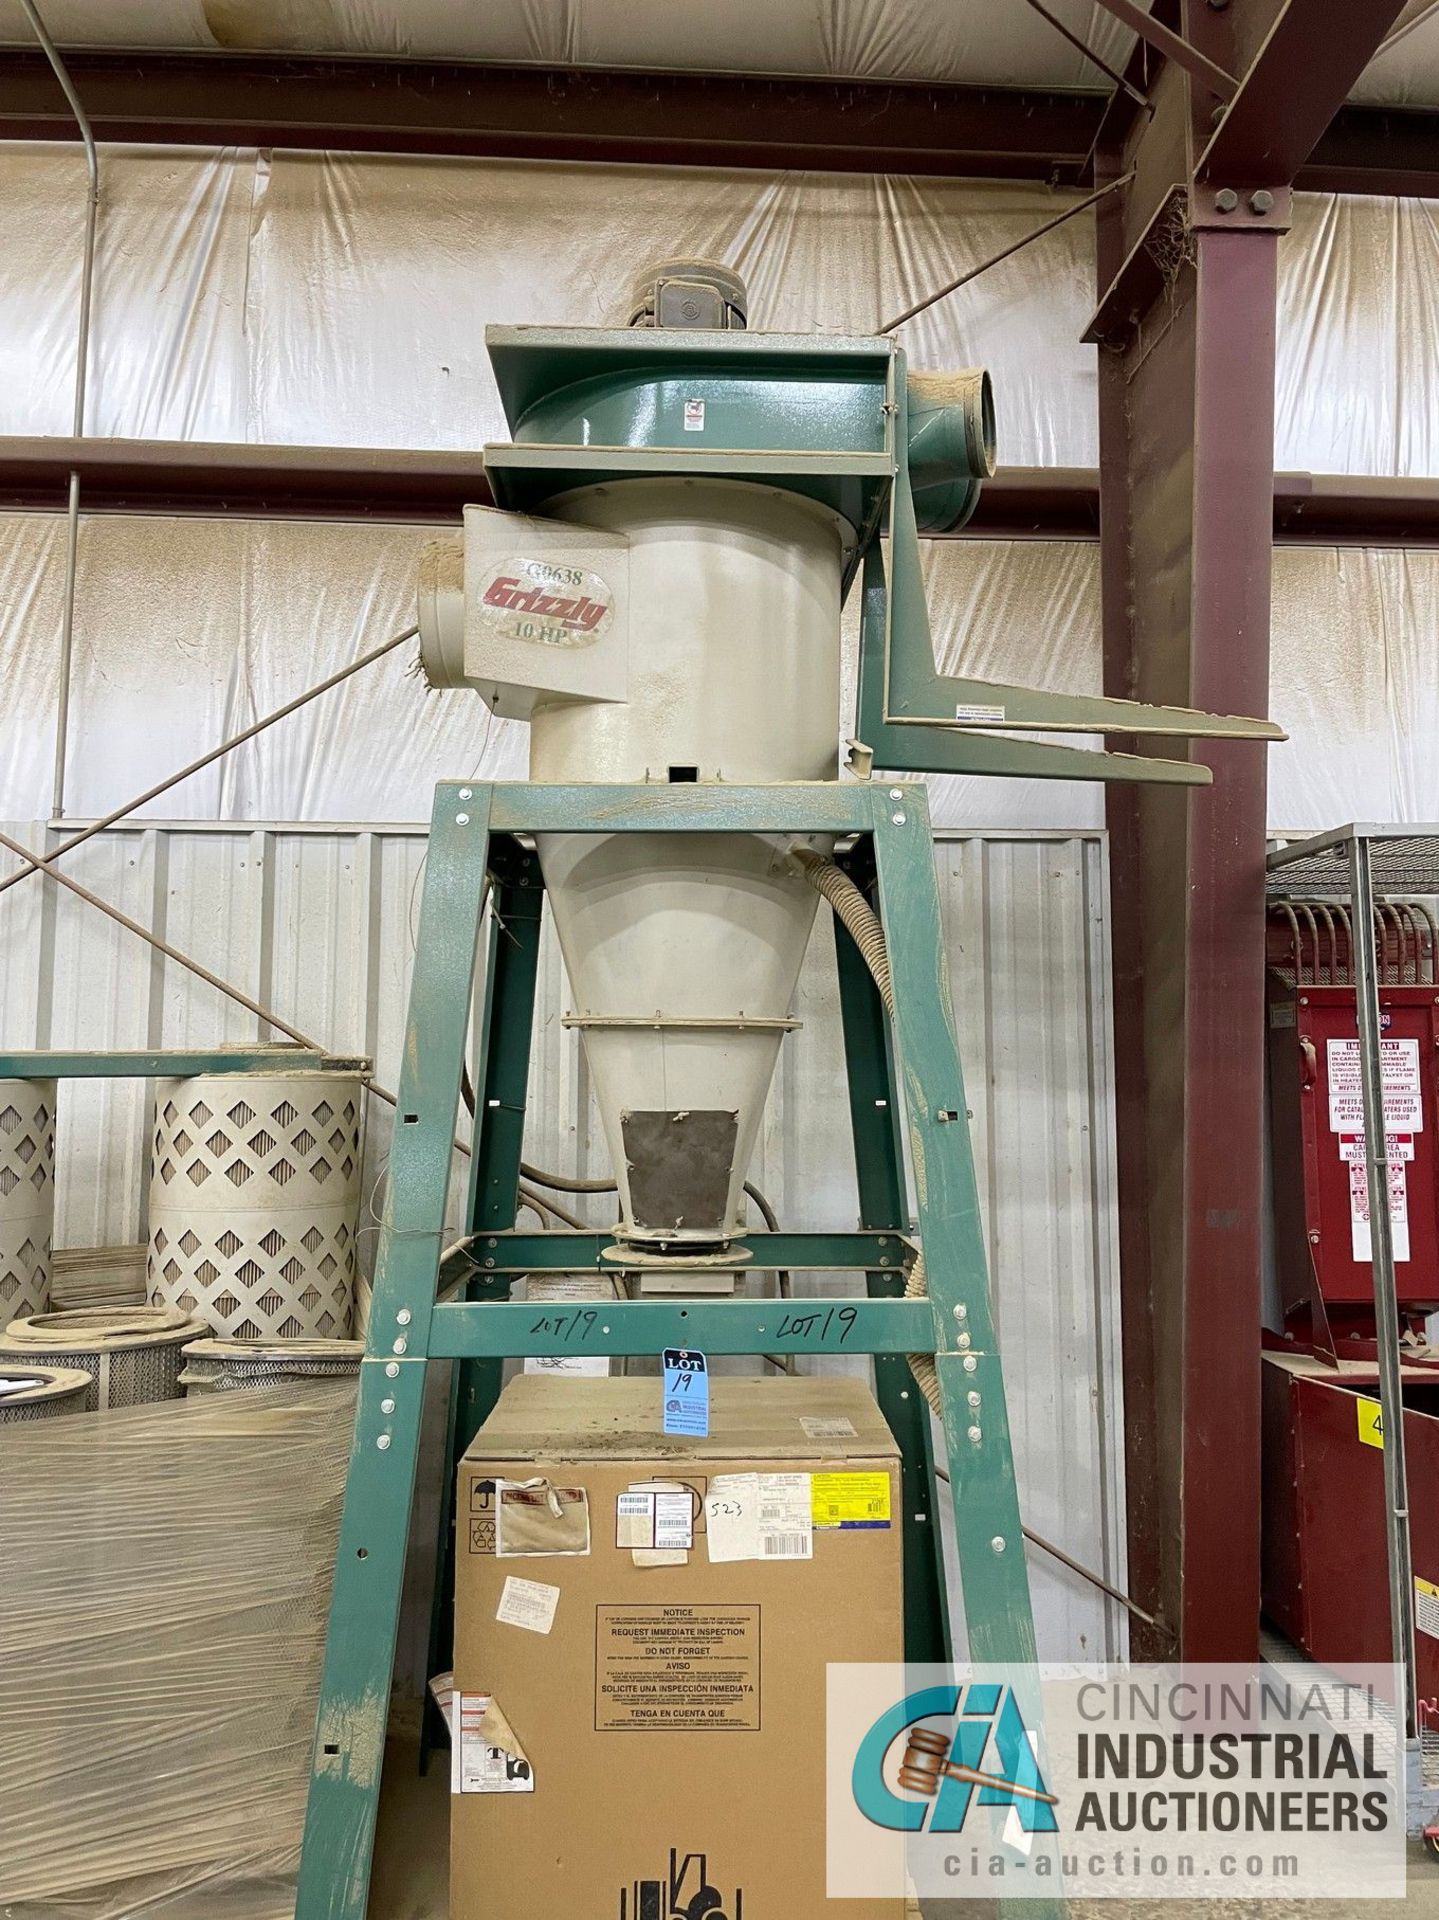 10-HP GRIZZLY MODEL G-0638 CYCLONE DUST COLLECTOR WITH SKID OF FILTERS, APPROX. 12' OVERALL HEIGHT - Image 2 of 5